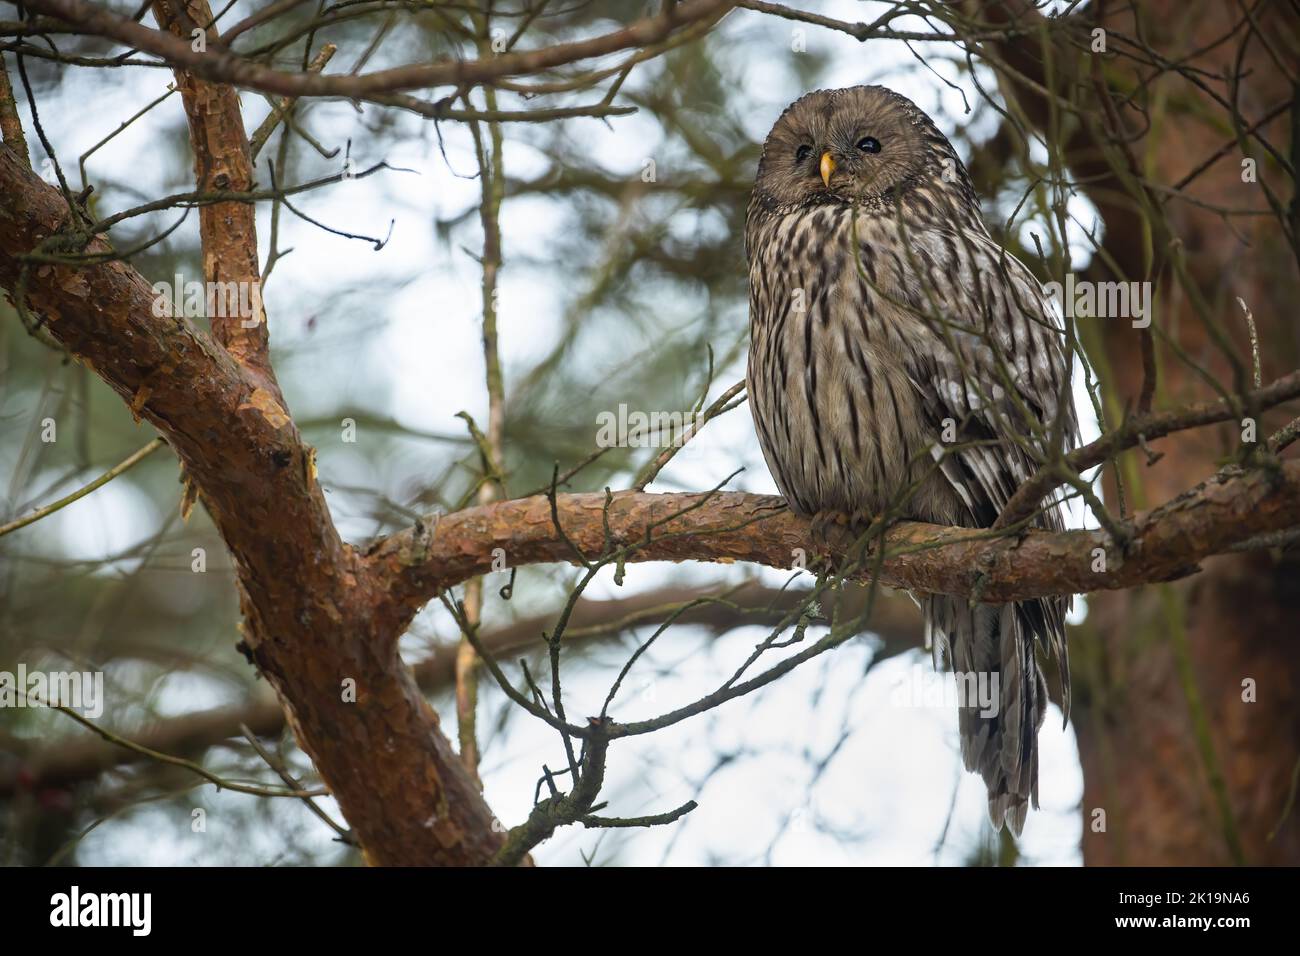 Ural owl sitting on tree in forest in aitimn nature Stock Photo